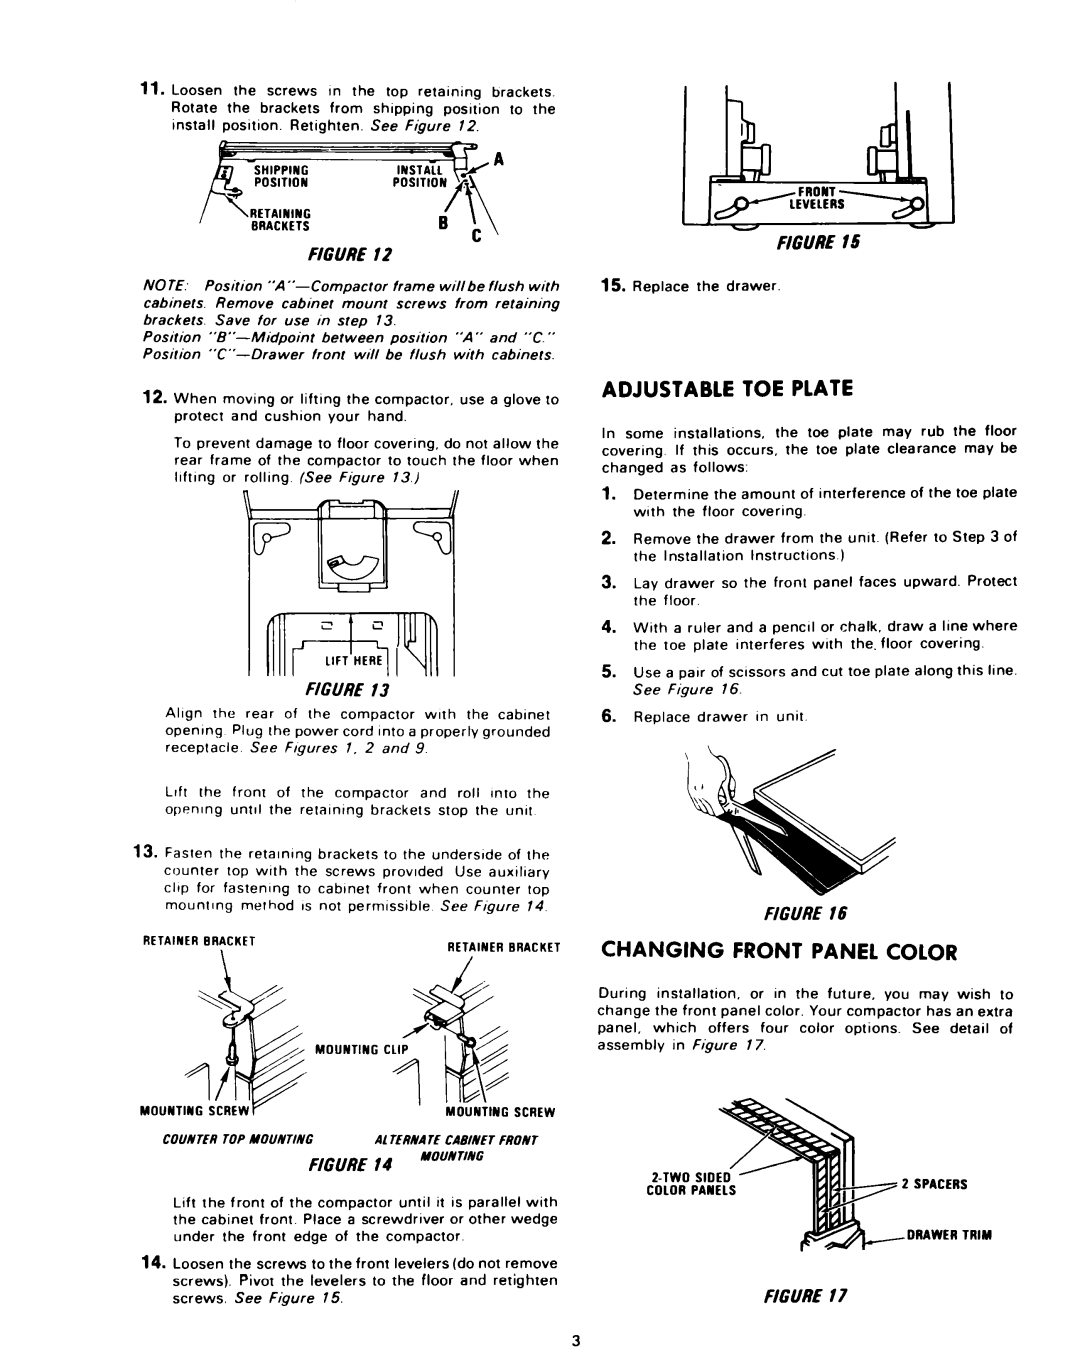 KitchenAid KCC-151 installation instructions Adjustable Toe Plate, Changing Front Panel Color, C Figure, qziJYqr 